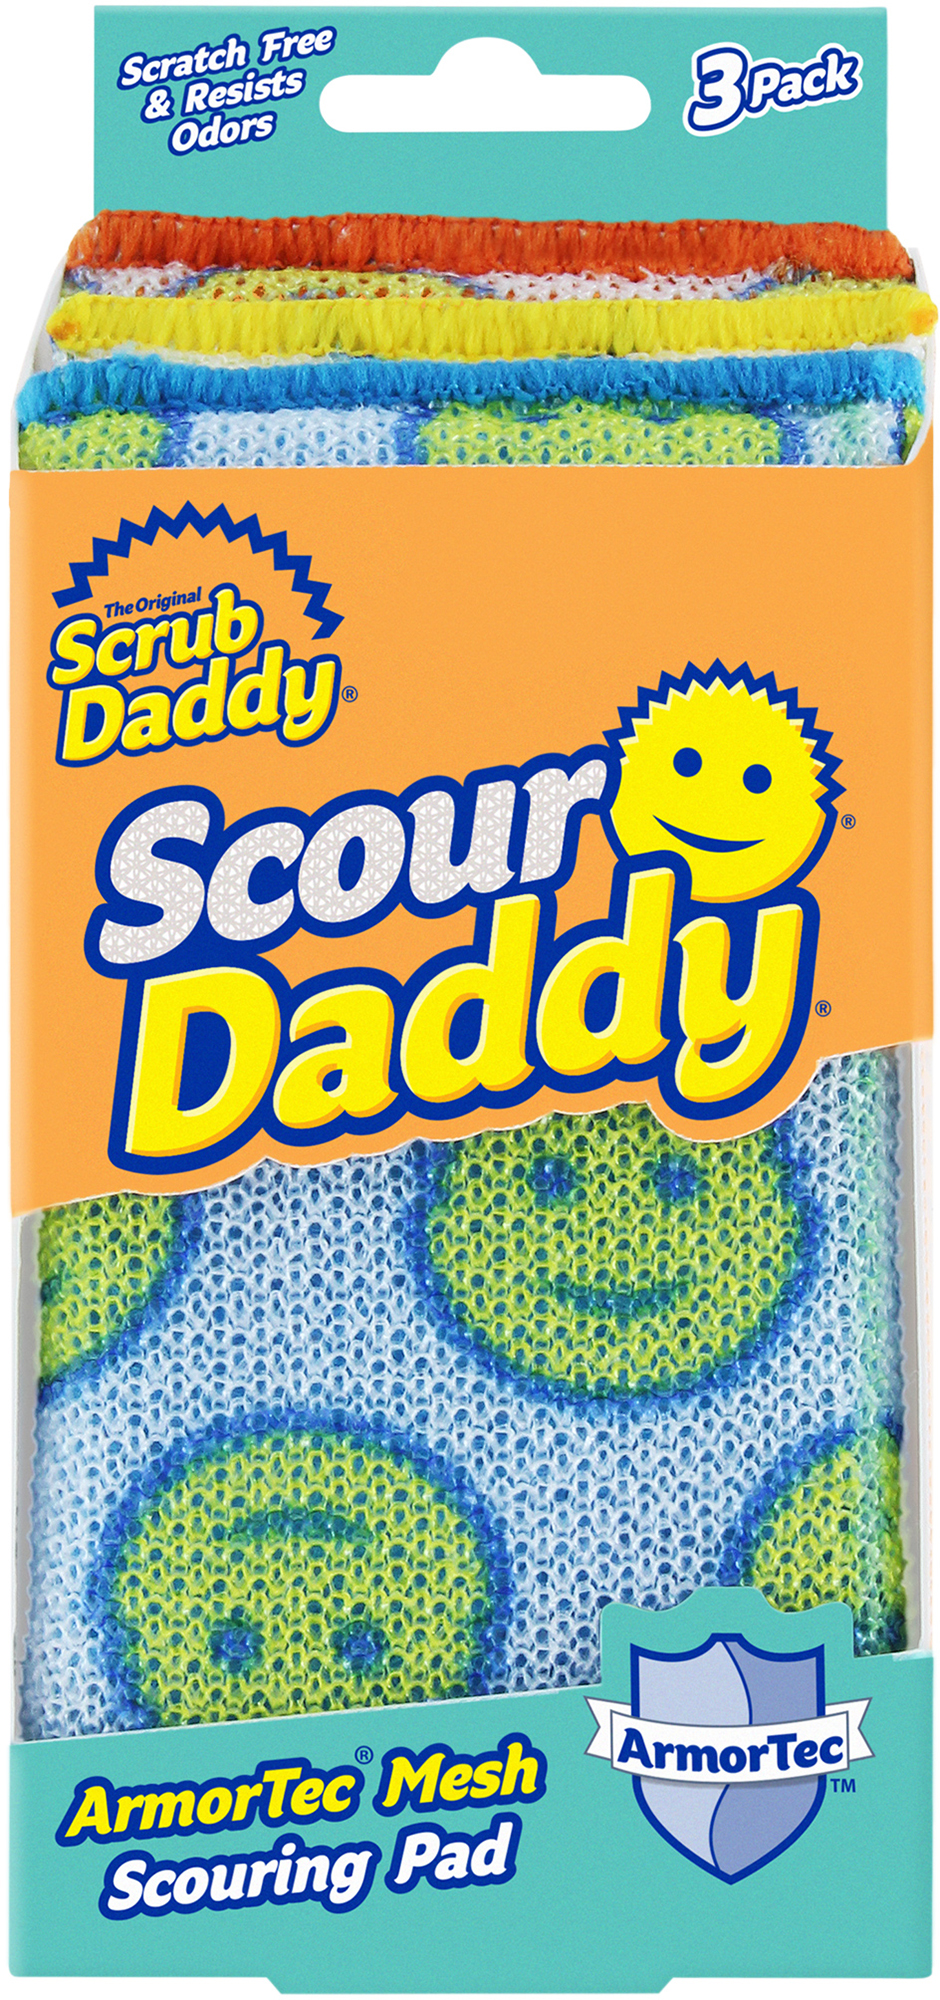 https://lyko.com/globalassets/product-images/scrub-daddy-scour-daddy-3375-109-0000_1.jpg?ref=5BA49E5BF3